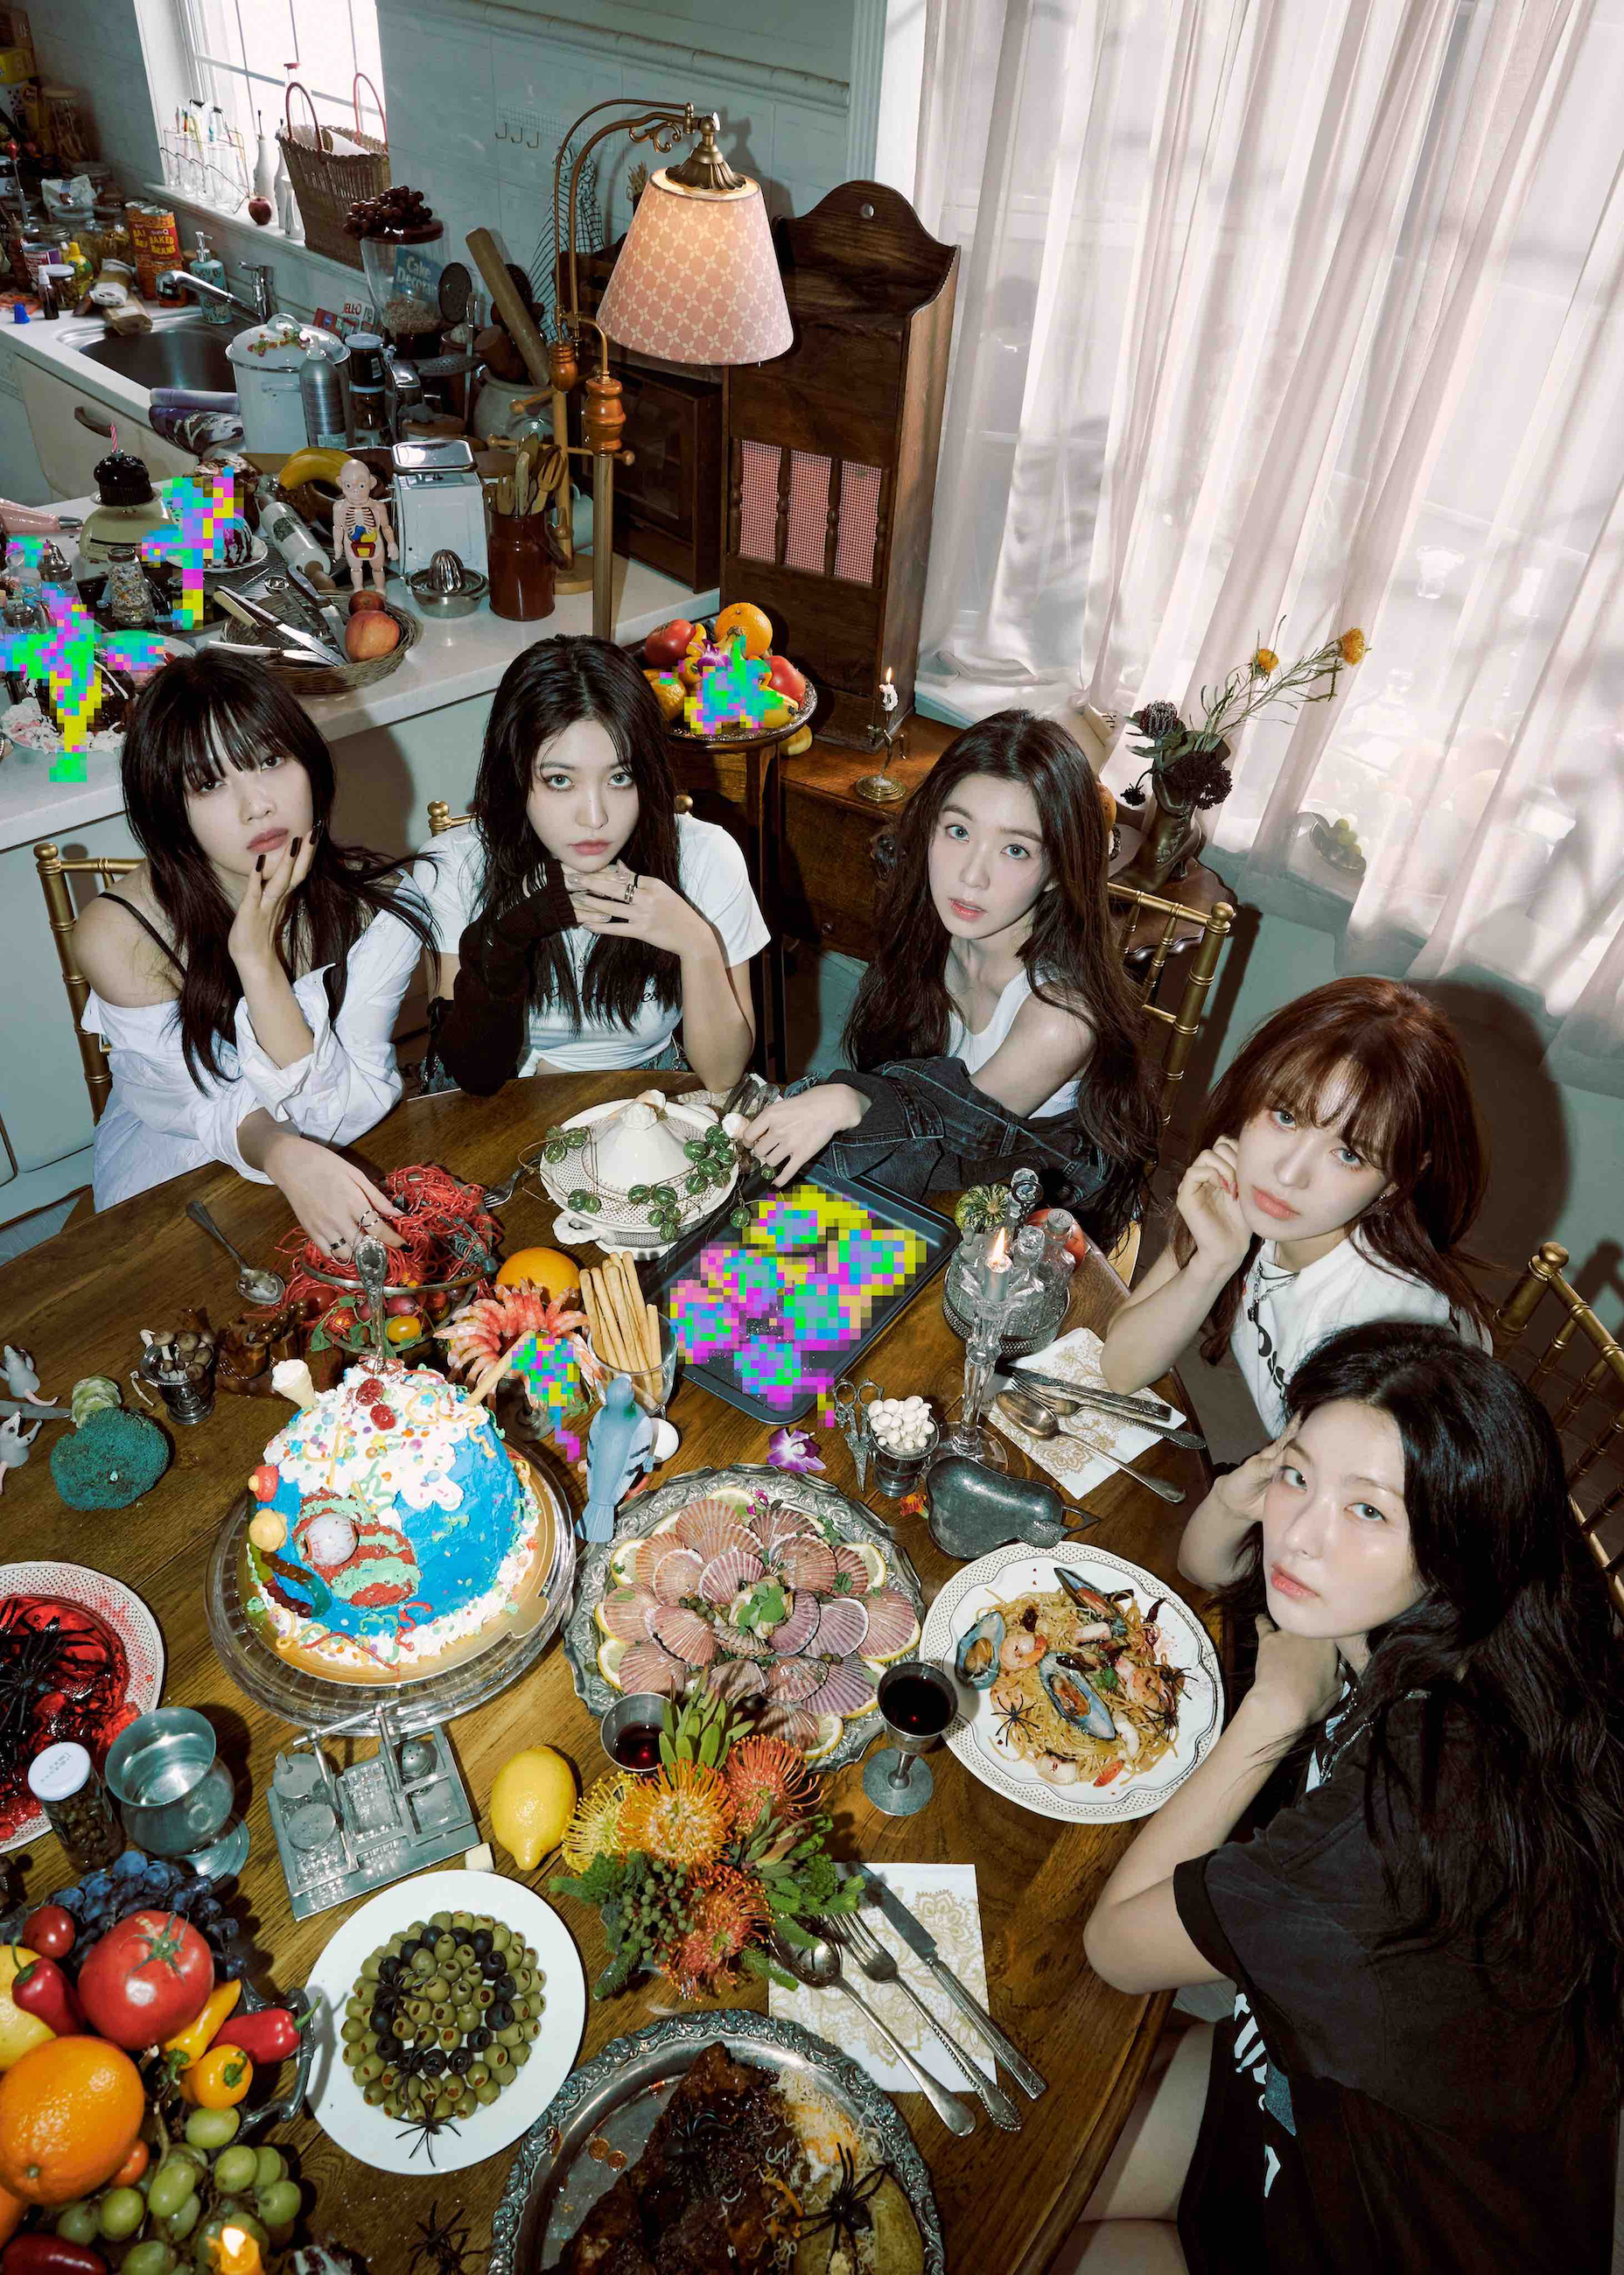 Red Velvet's New Song 'Russian Roulette' Is Cute and Dangerous